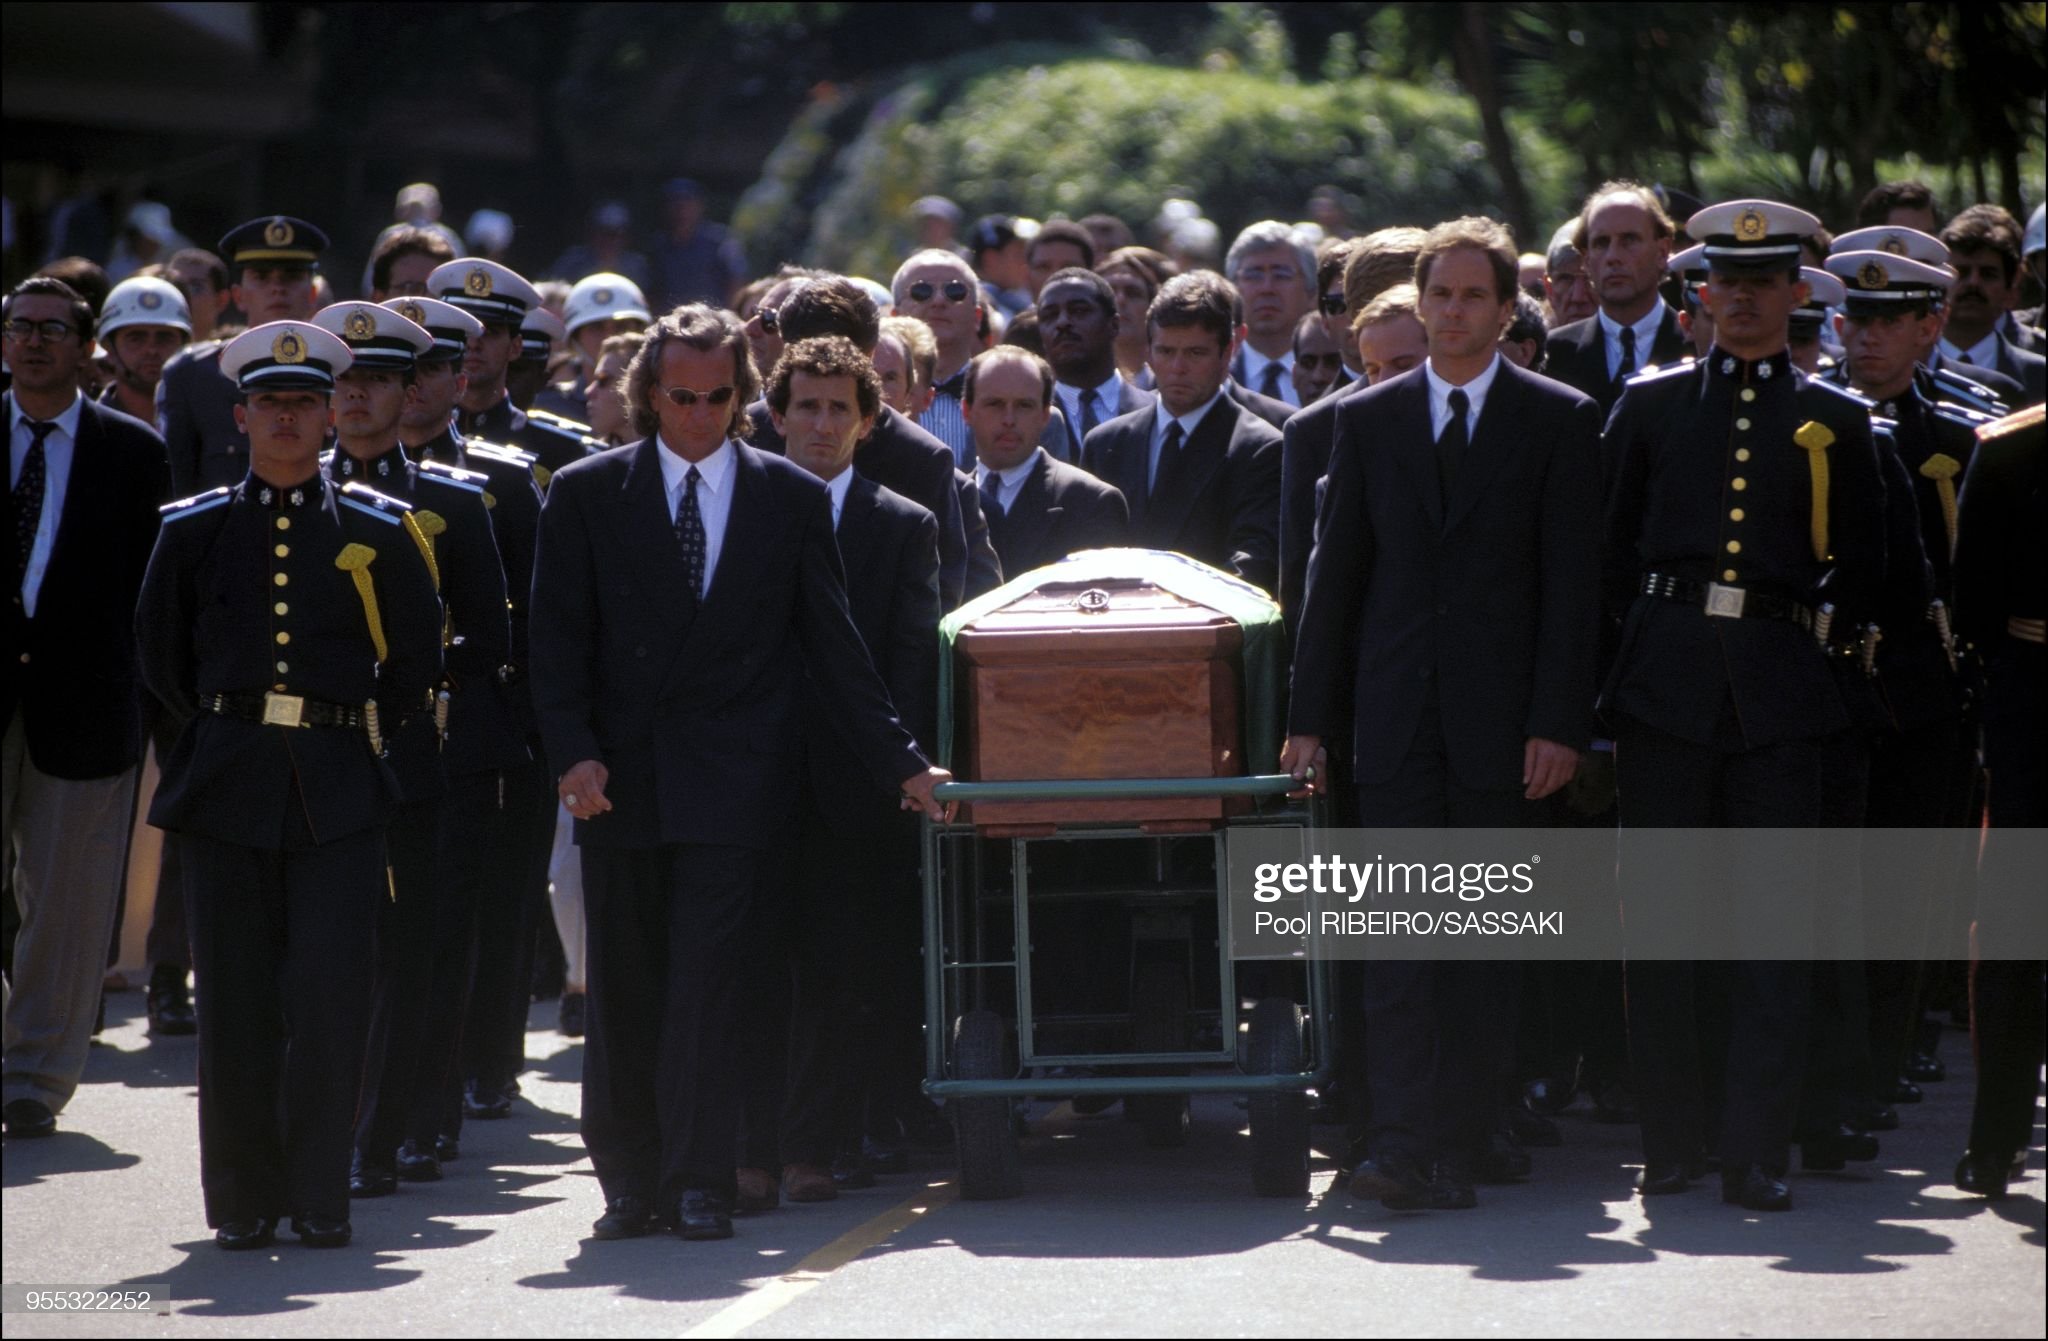 Emerson Fittipaldi, Alain Prost and Gerhard Berger next to the coffin of Ayrton Senna. 